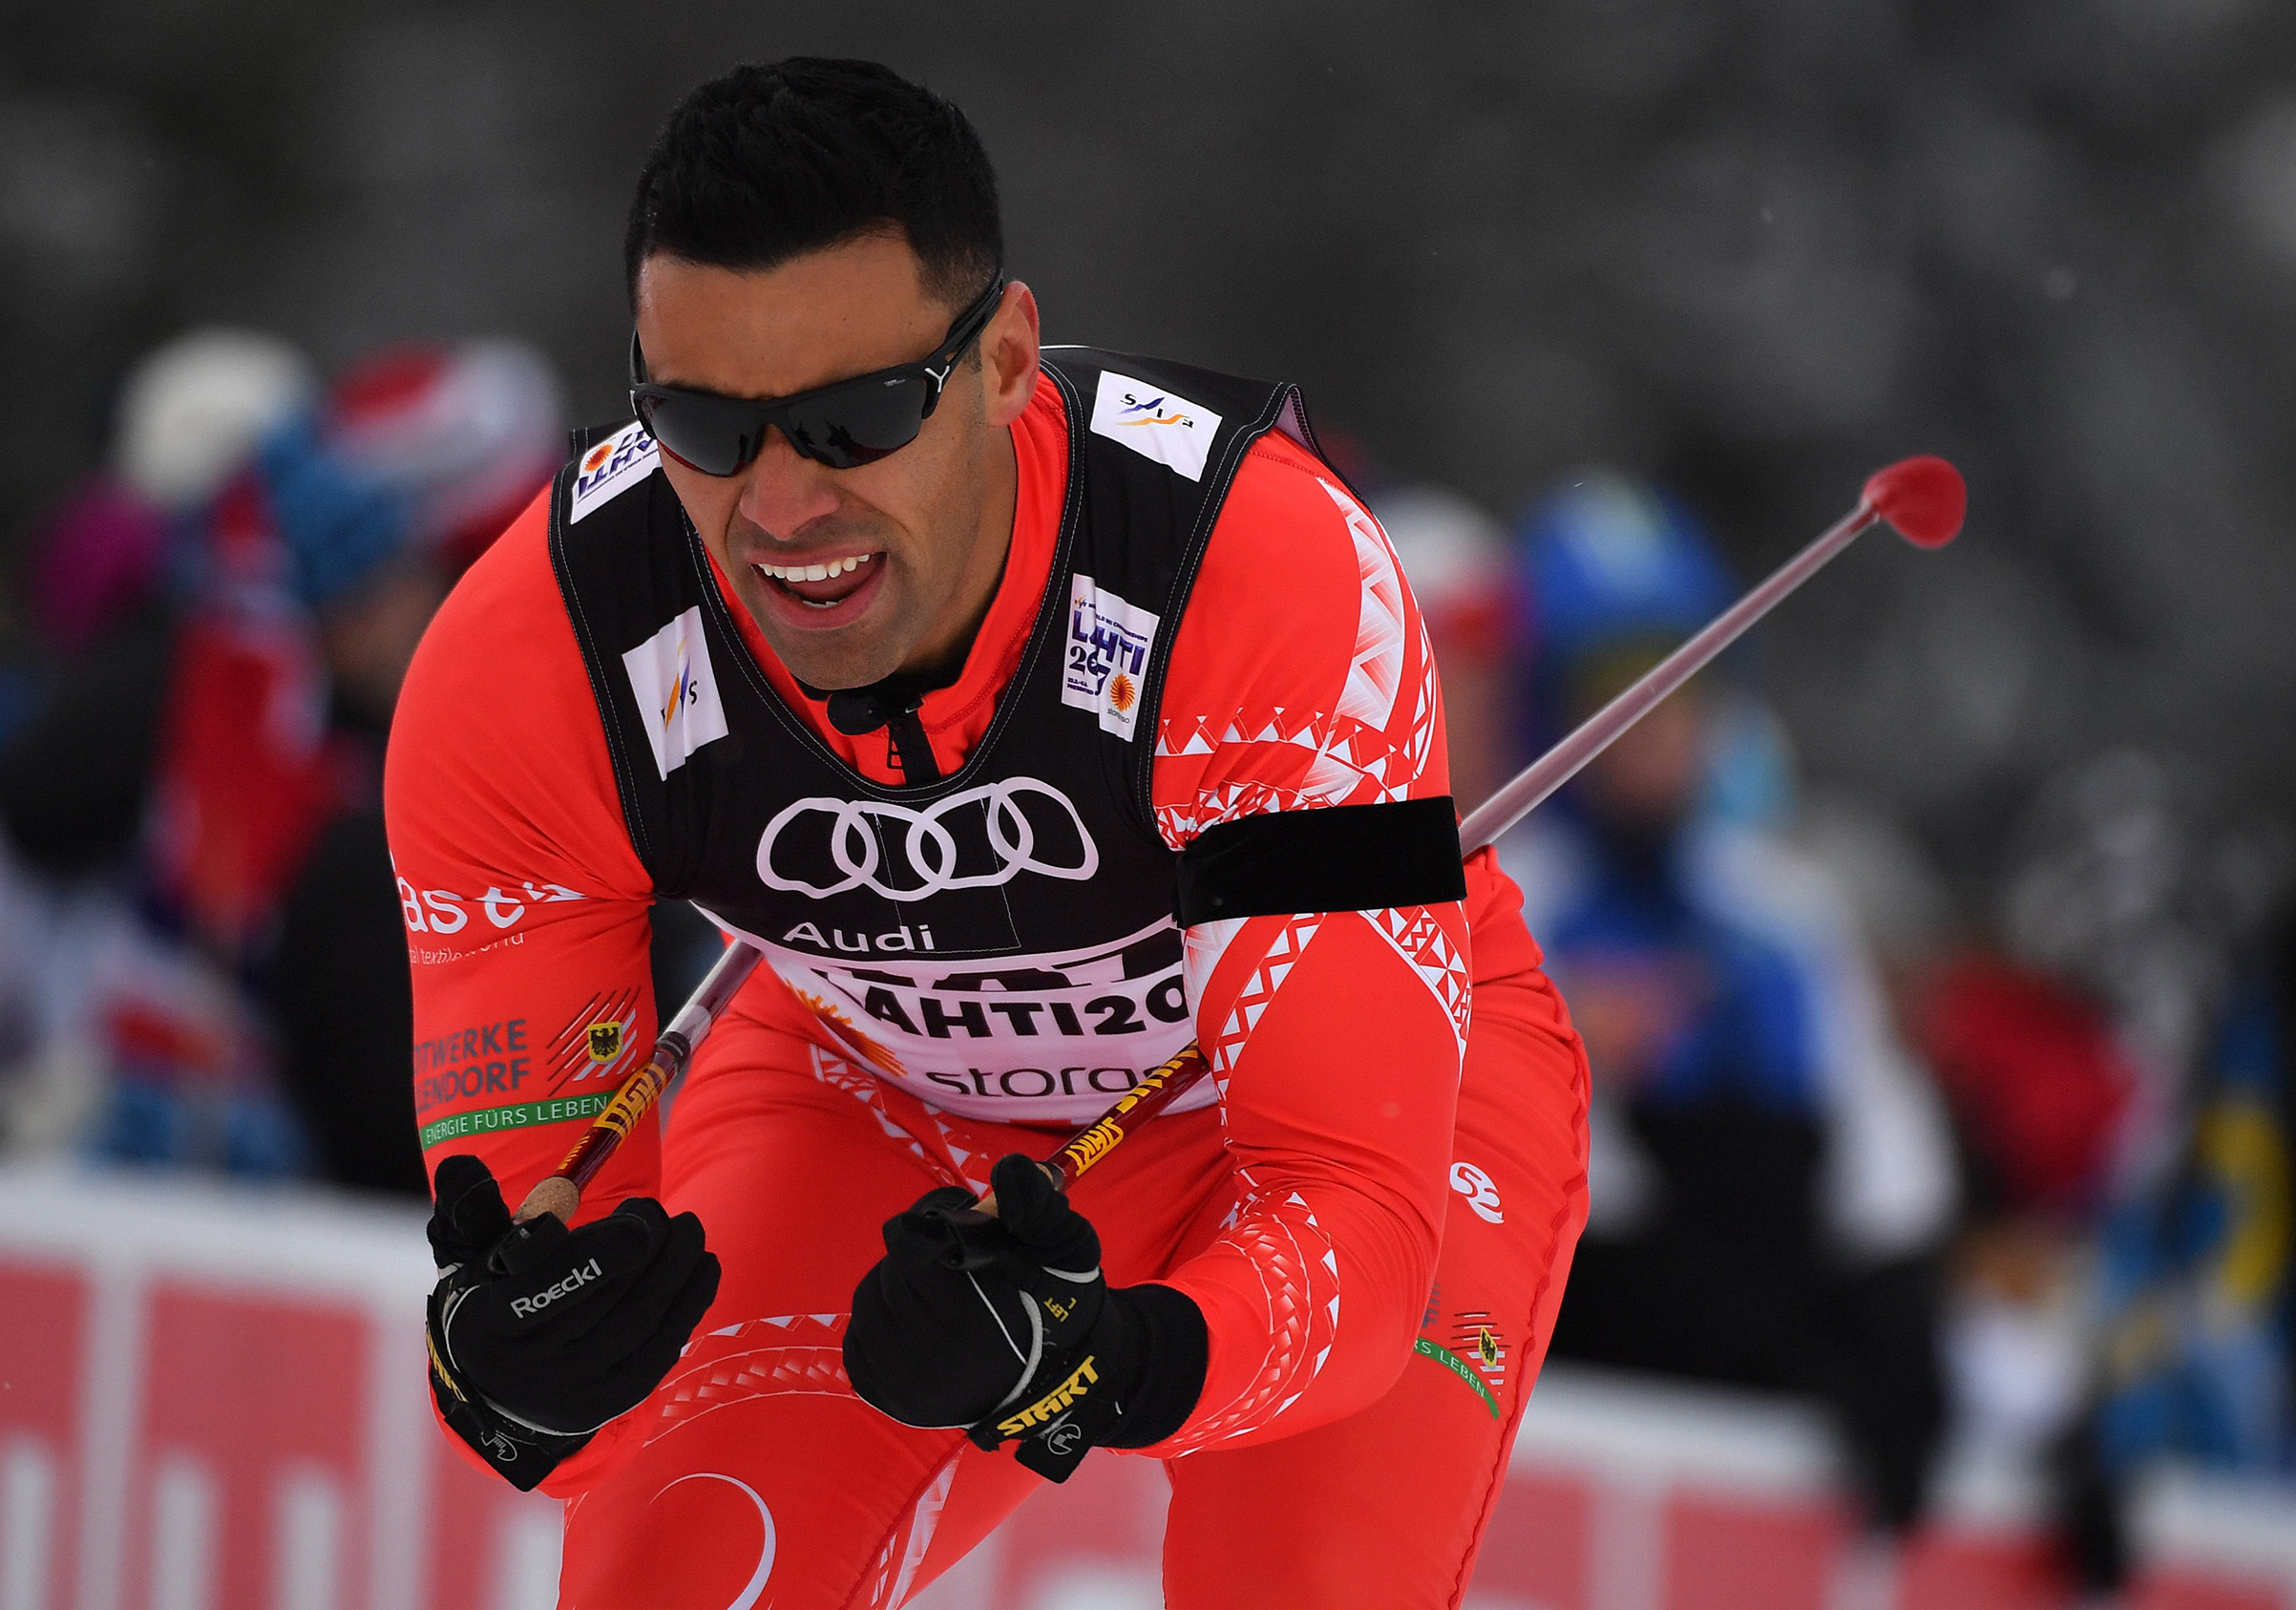 Tonga's Pita Taufatofua competes in the men's cross country sprint qualification at the 2017 Nordic Skiing World Championships in Lahti, Finland. Hendrik Schmidt—Picture Alliance/dpa/AP (Hendrik Schmidt—Picture Alliance/dpa/AP)